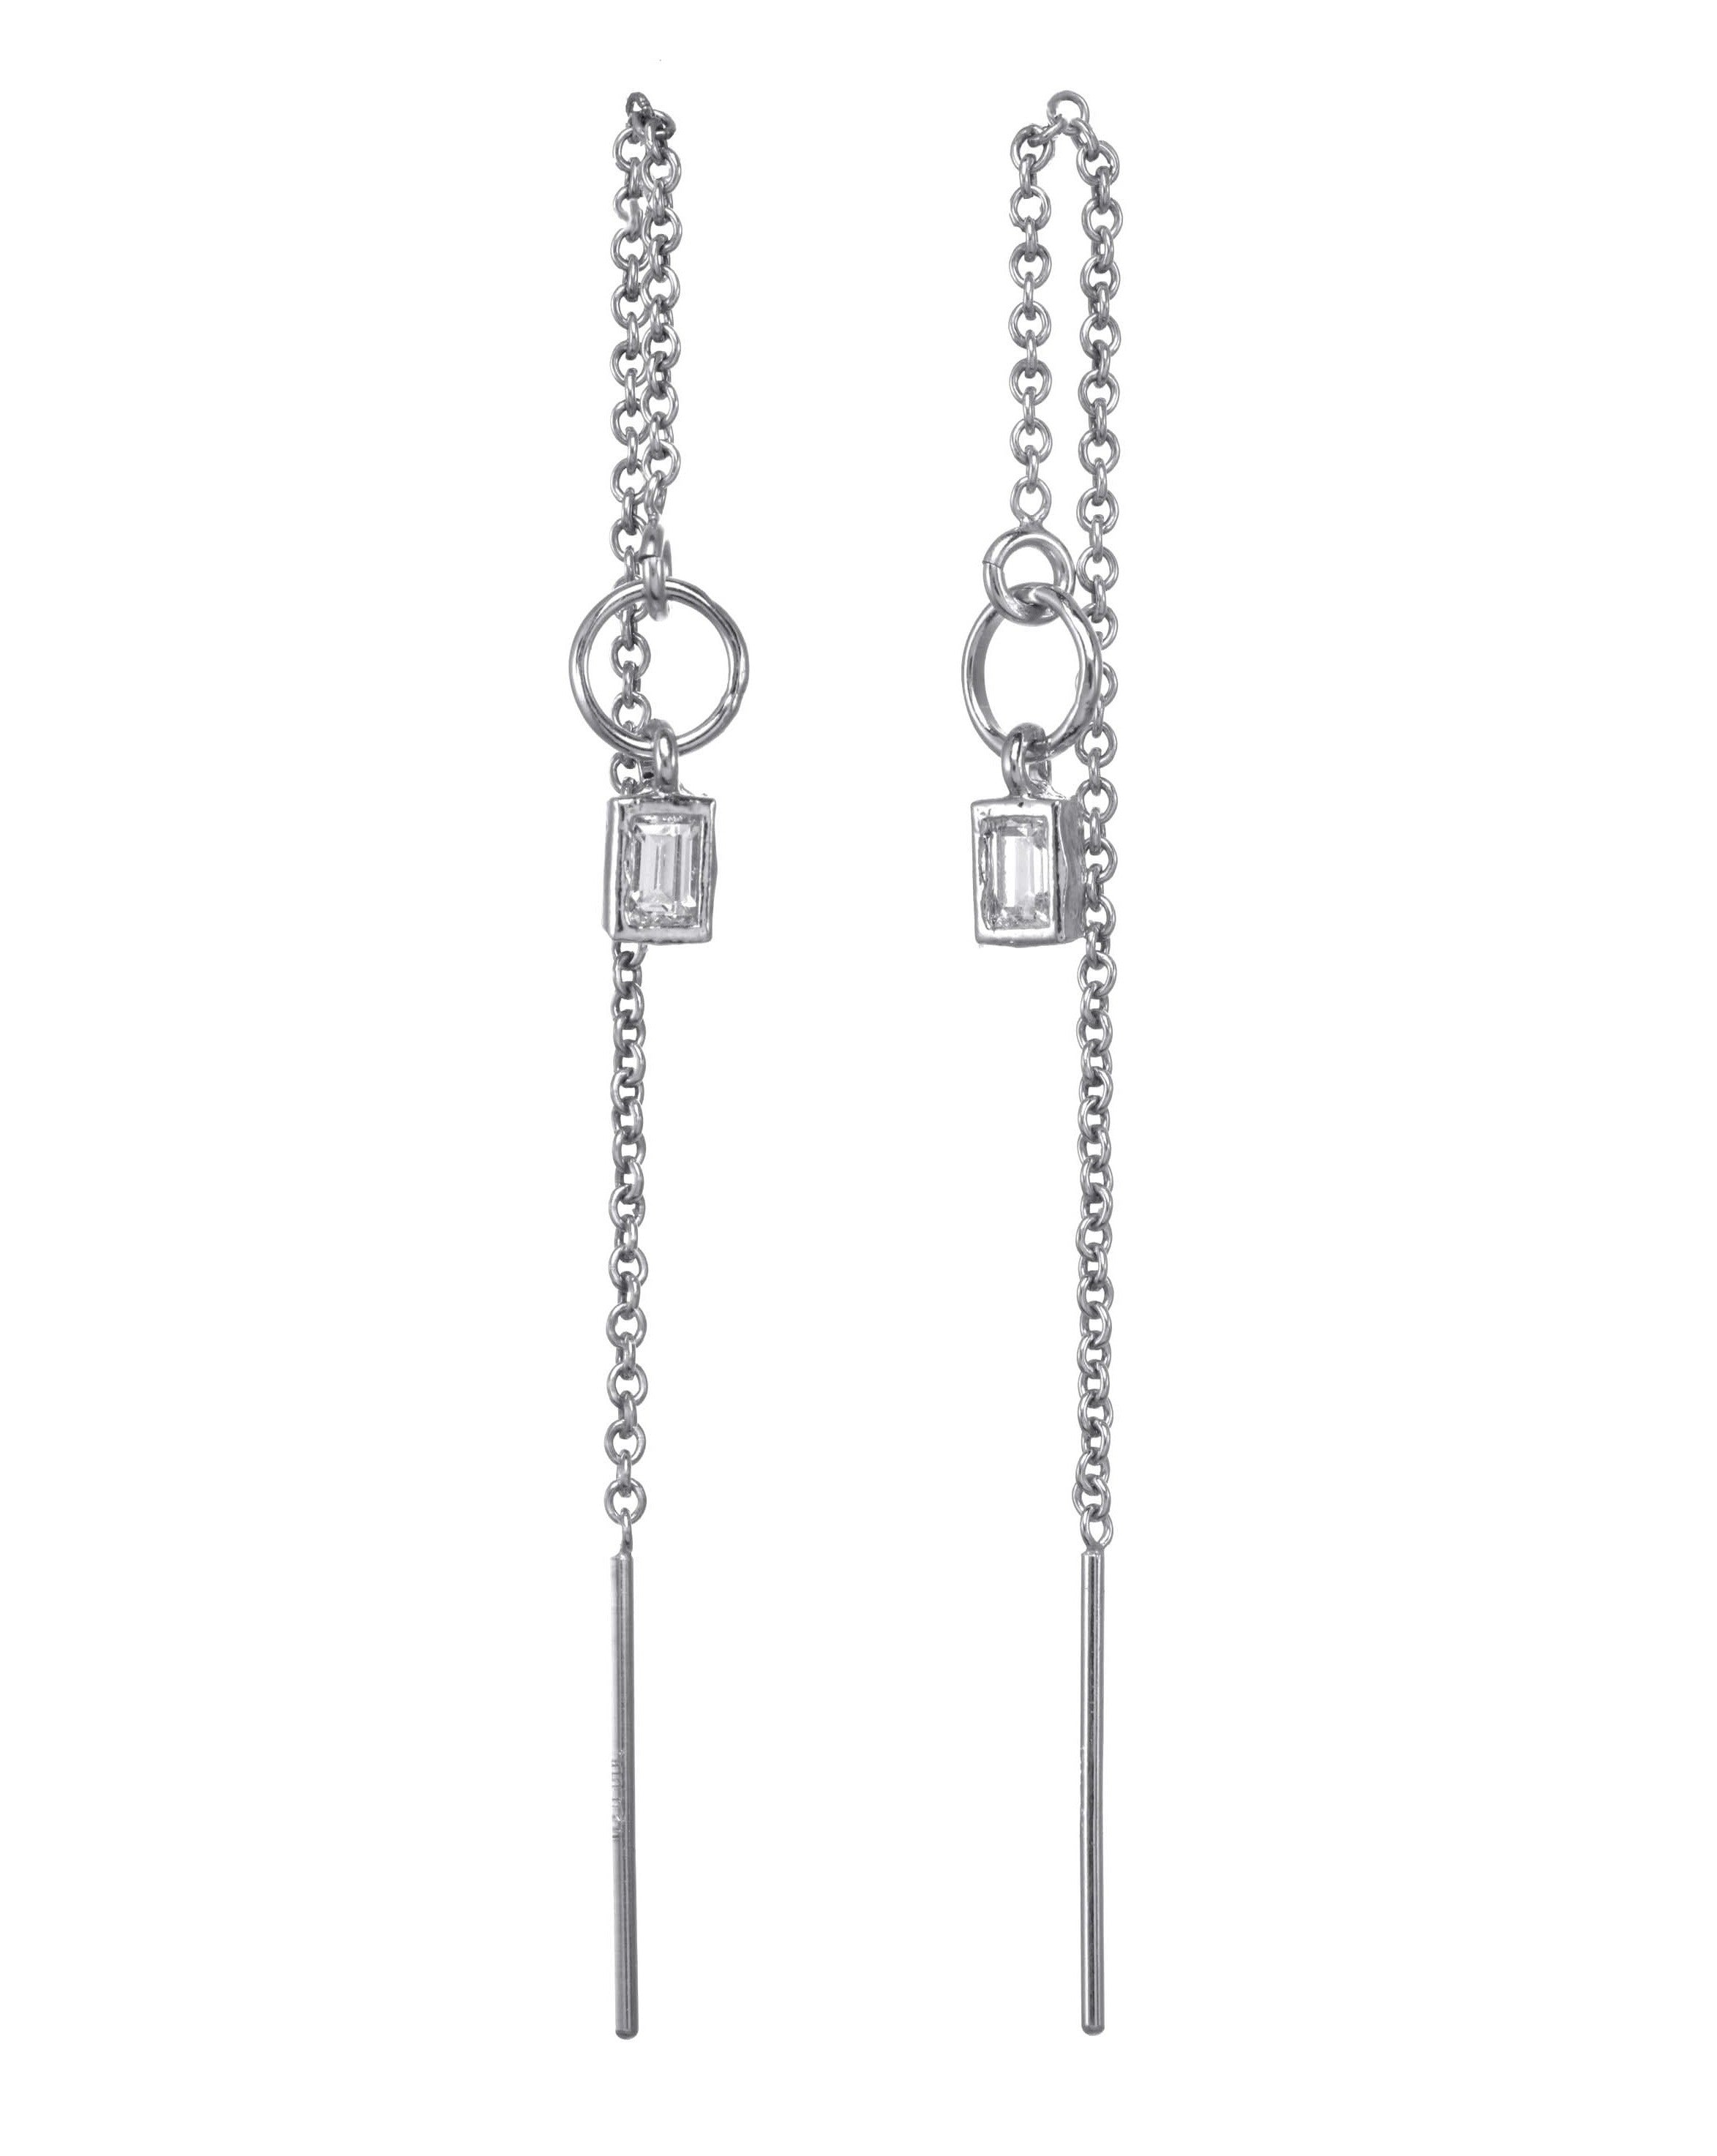 Grace Threaders by KOZAKH. Threader style earrings with drop length of 1 inch on both sides, crafted in Sterling Silver, featuring a square cut Cubic Zirconia.